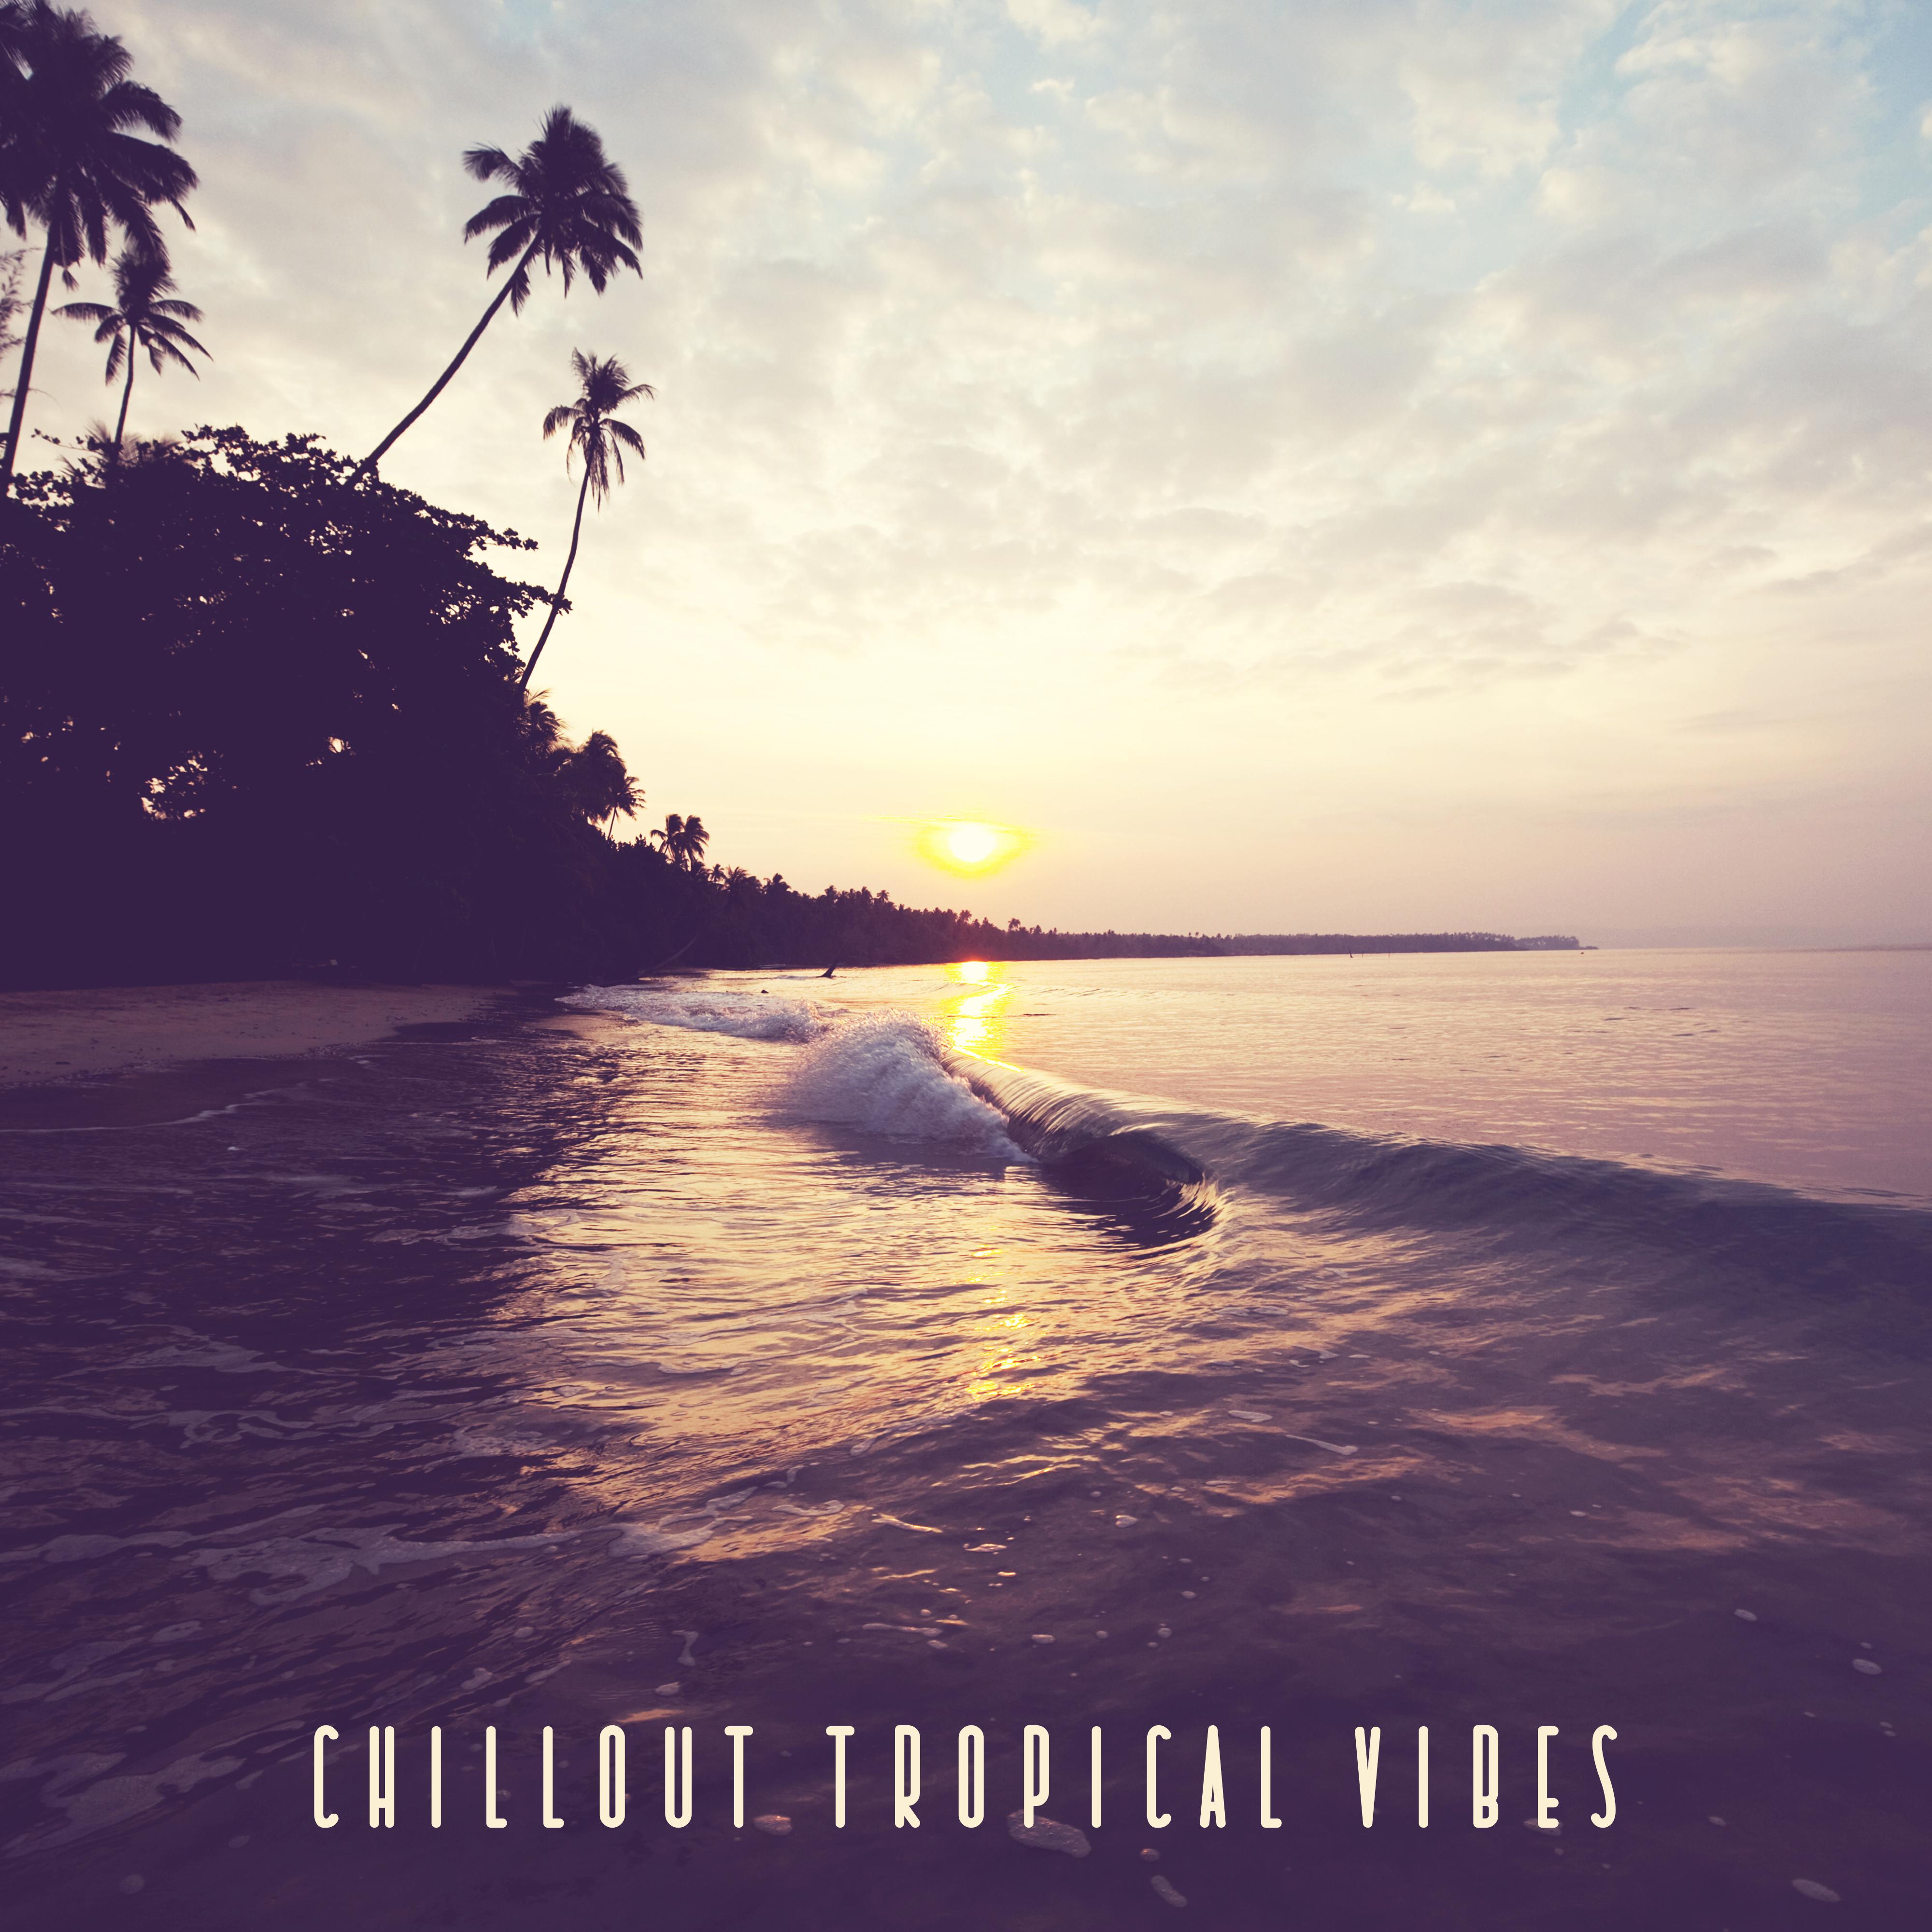 Chillout Tropical Vibes